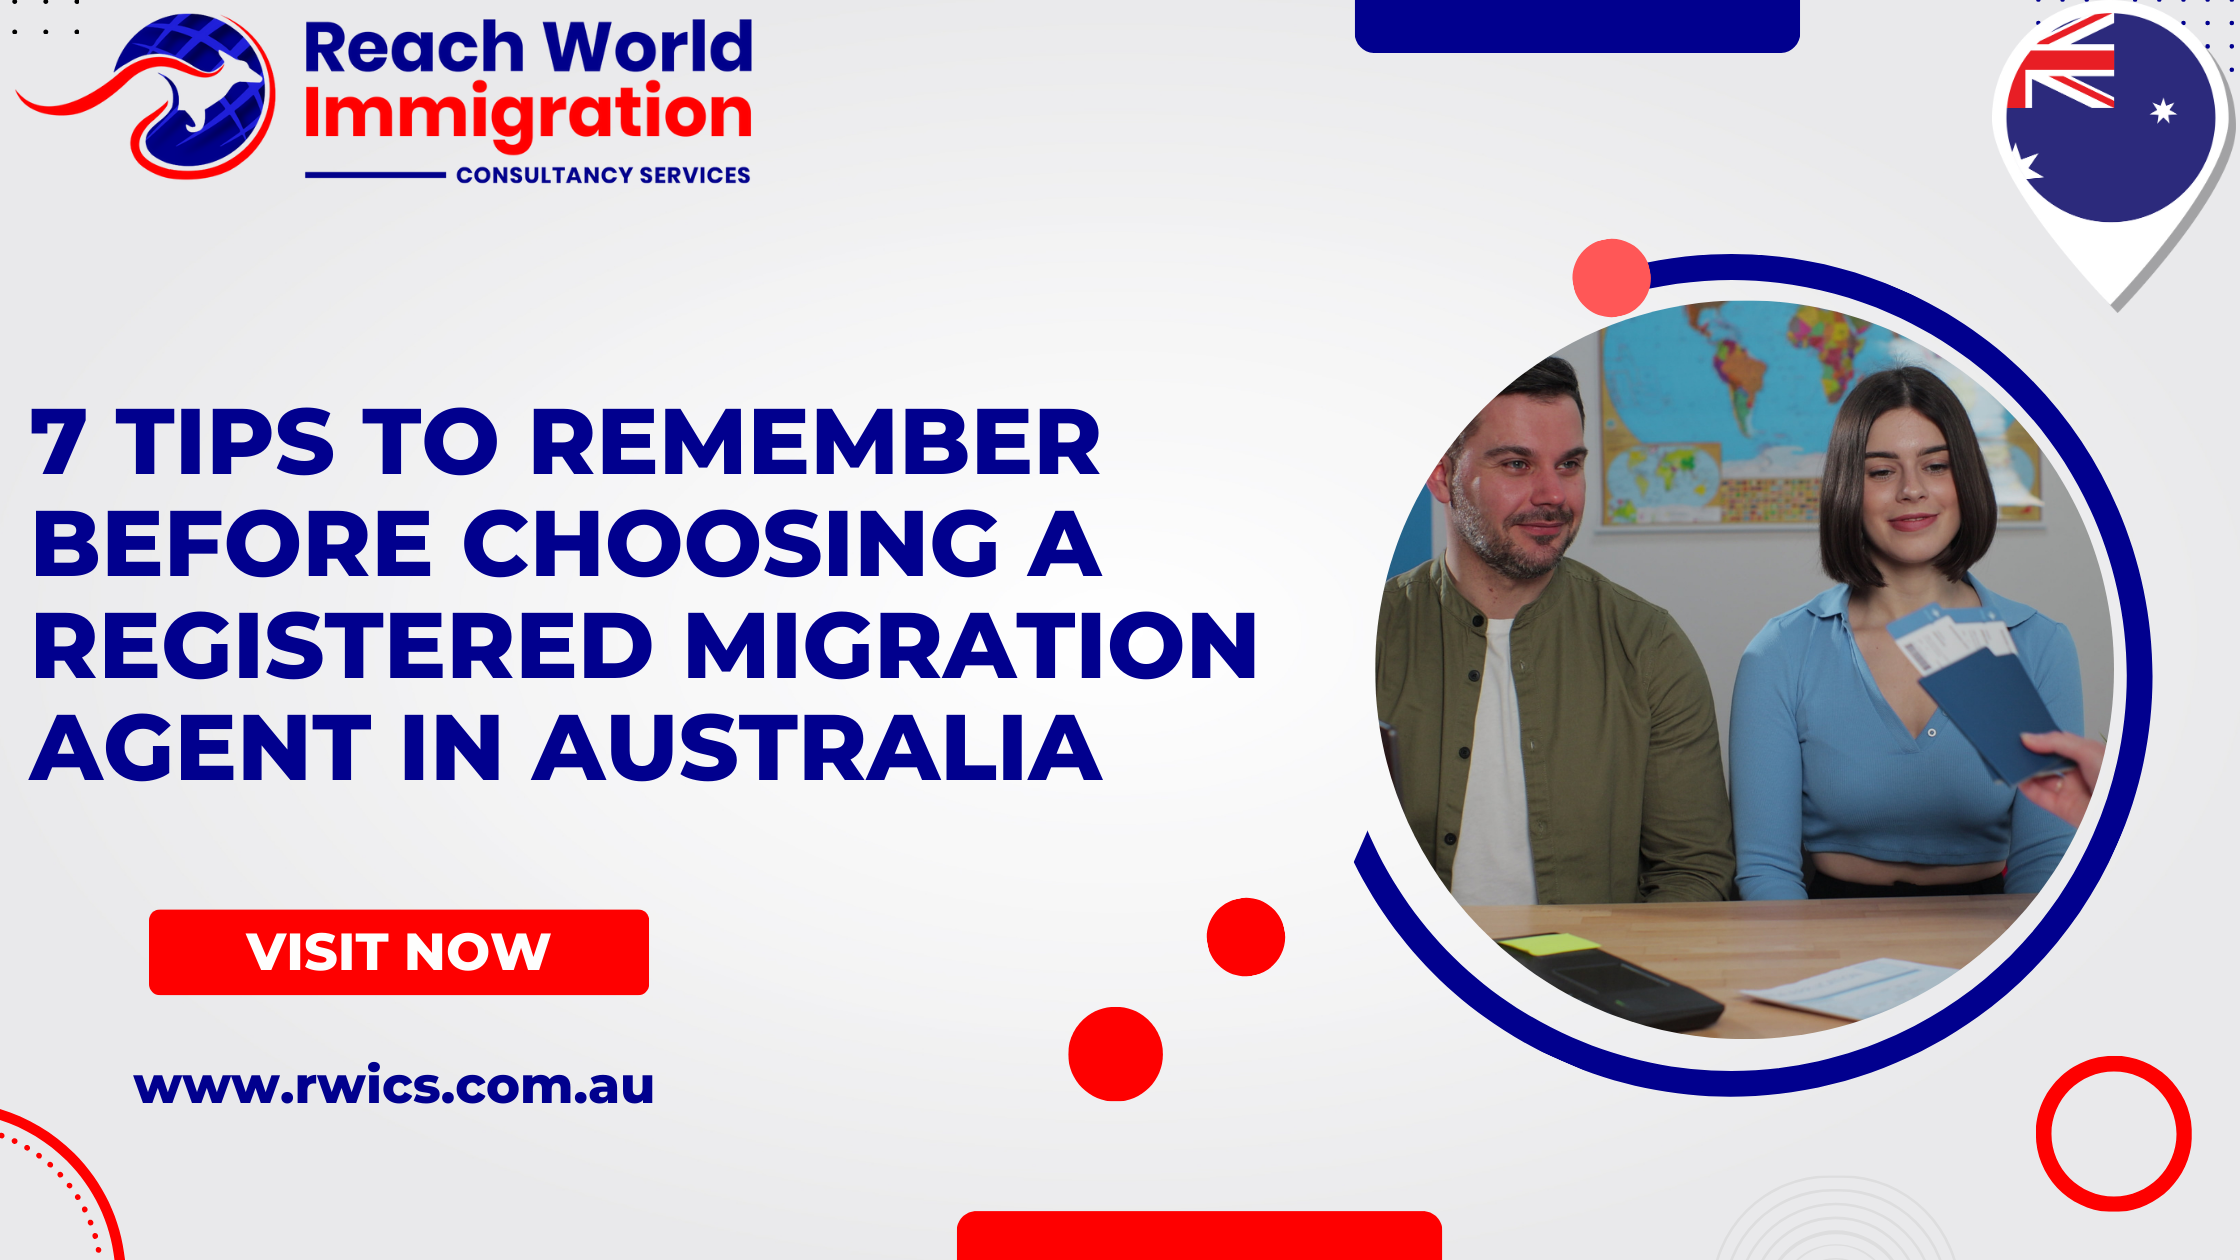 7 Tips to Remember Before Choosing a Registered Migration Agent in Australia